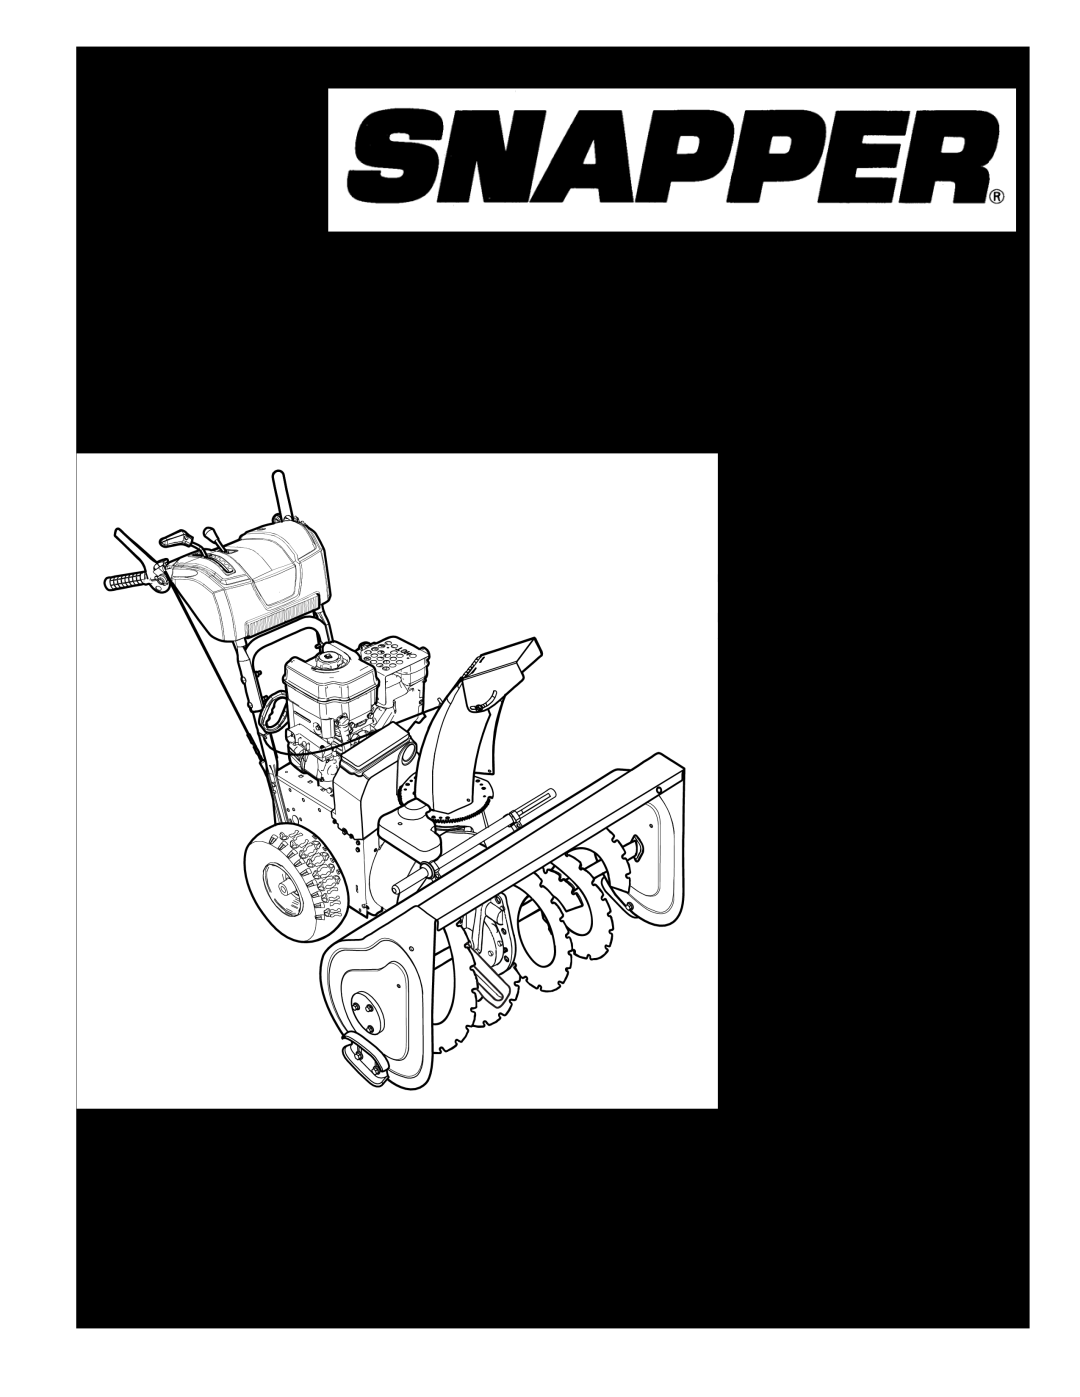 Snapper 1696003 manual 27 & 29 TWO STAGE INTERMEDIATE SNOWTHROWERS, Parts Manual for, Model No. Description, Manual No 